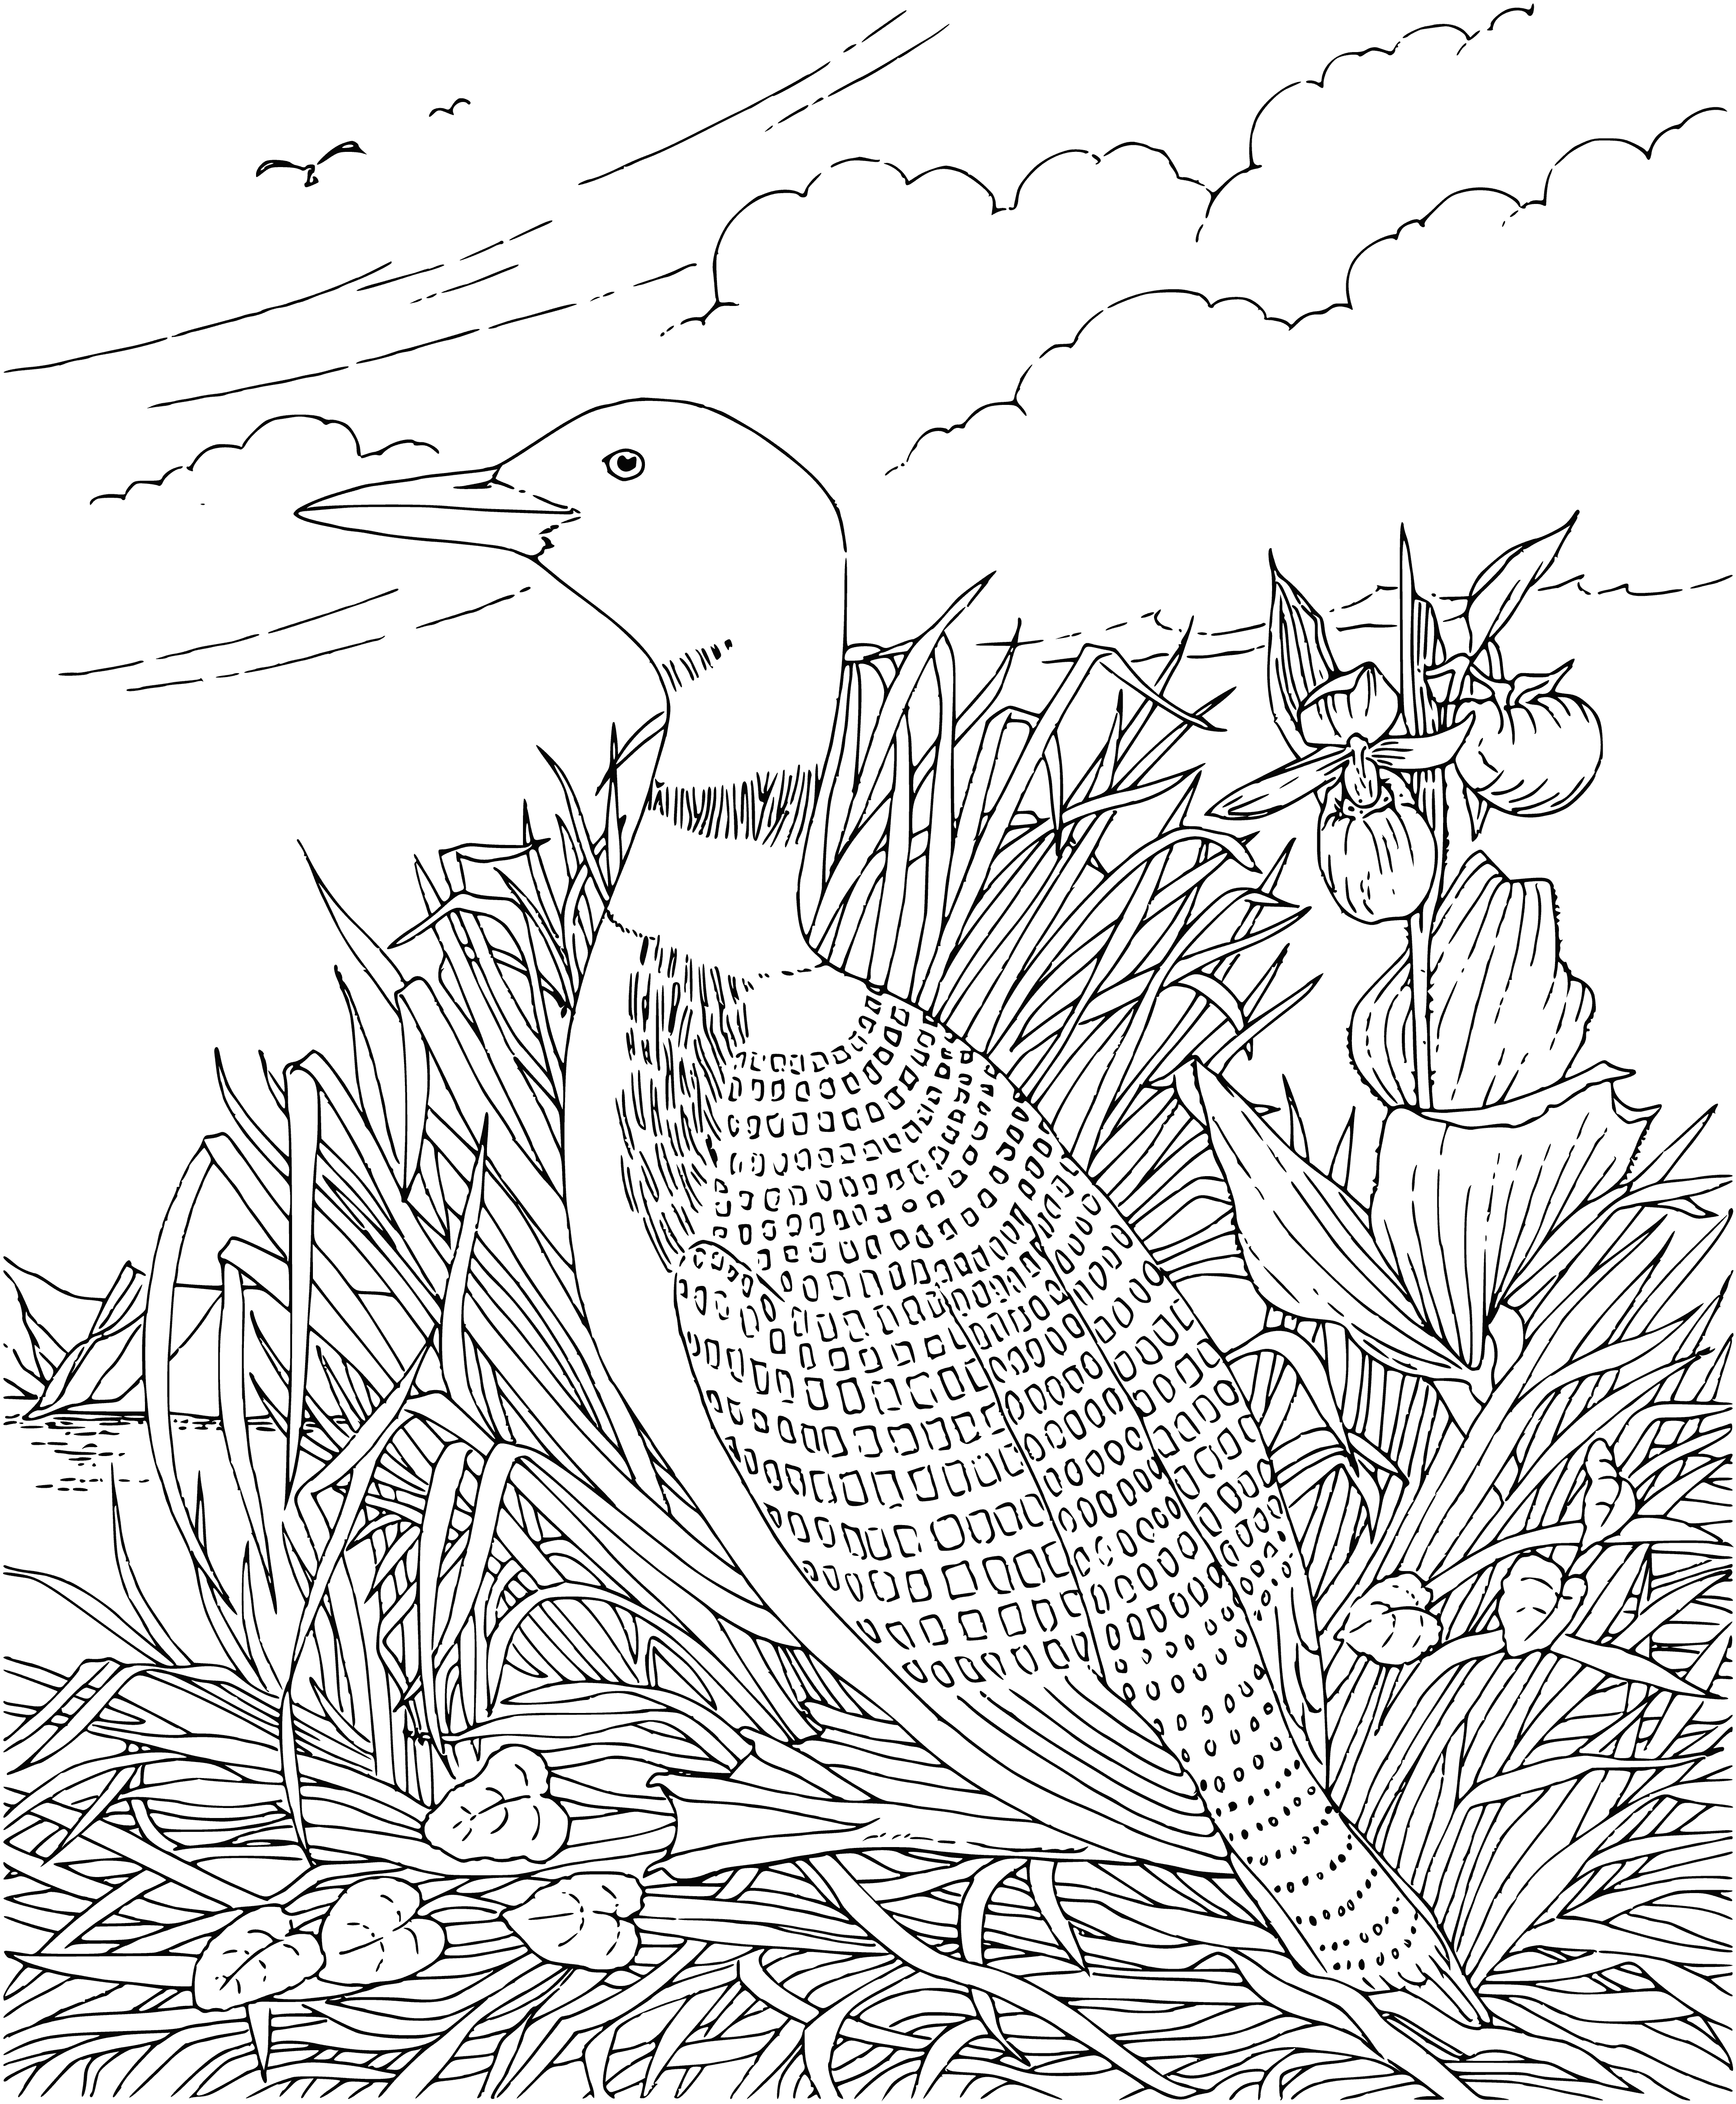 coloring page: Two waterbirds - one swimming, one standing - w/ black & white feathers. One has black head & back, the other white. White feathers on first reflect water. #nature